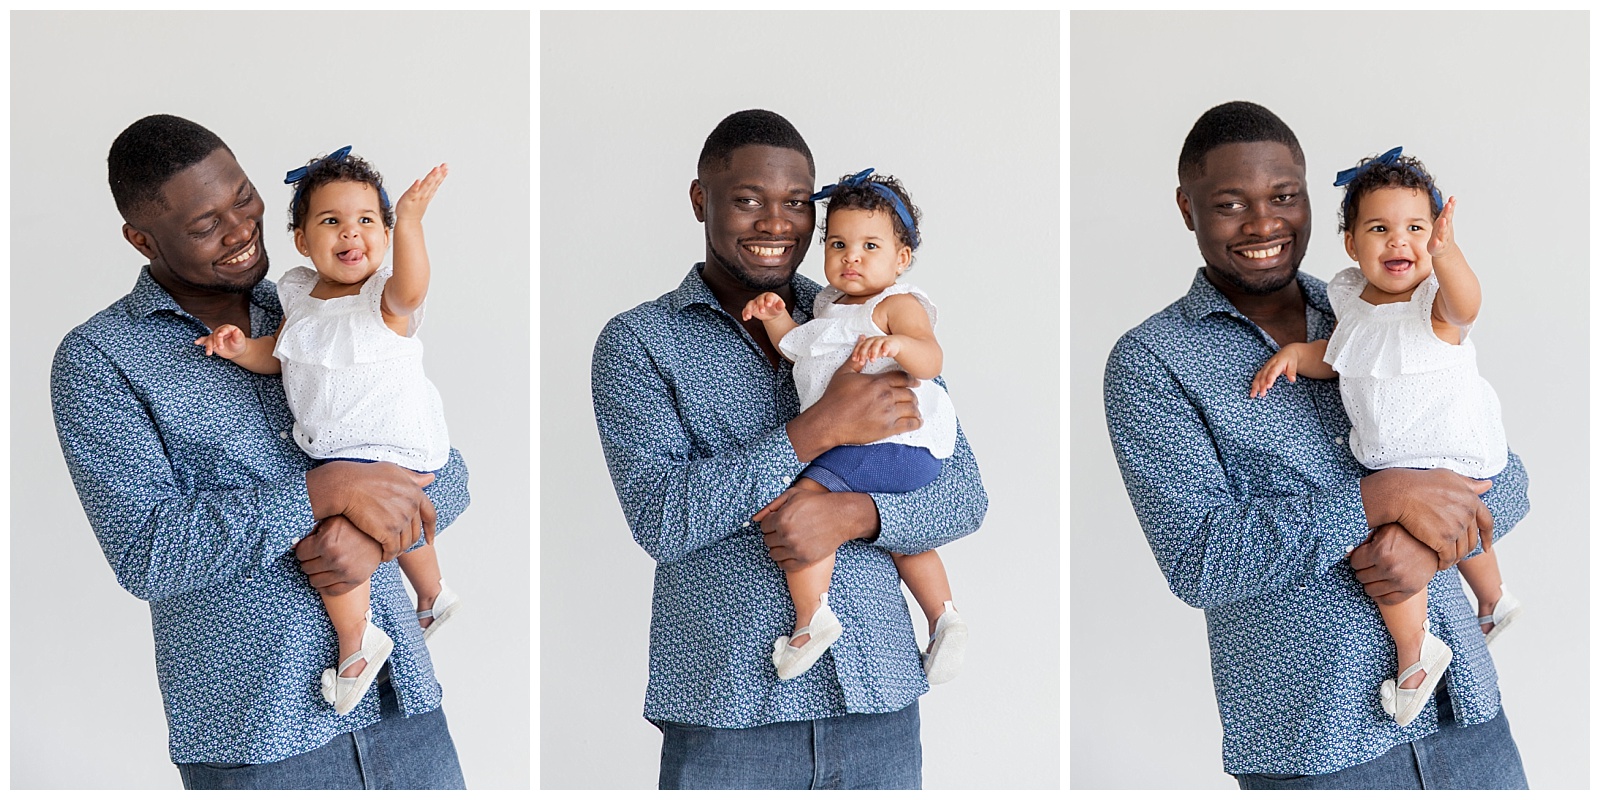 Cute and diverse family photoshoot at the lumen room in Dallas Texas by Alyssa Grace Photography